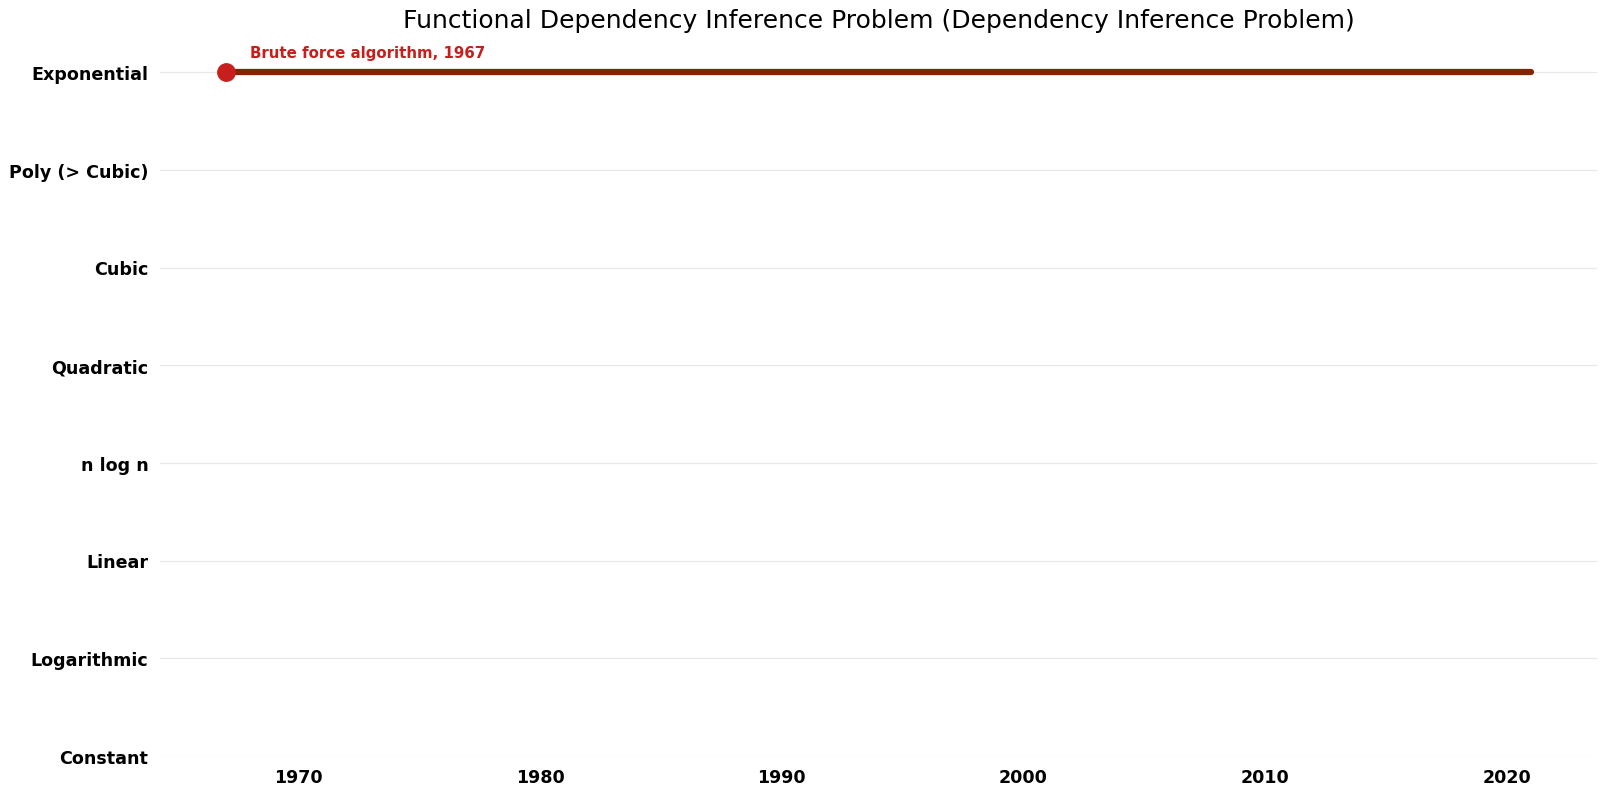 Dependency Inference Problem - Functional Dependency Inference Problem - Time.png